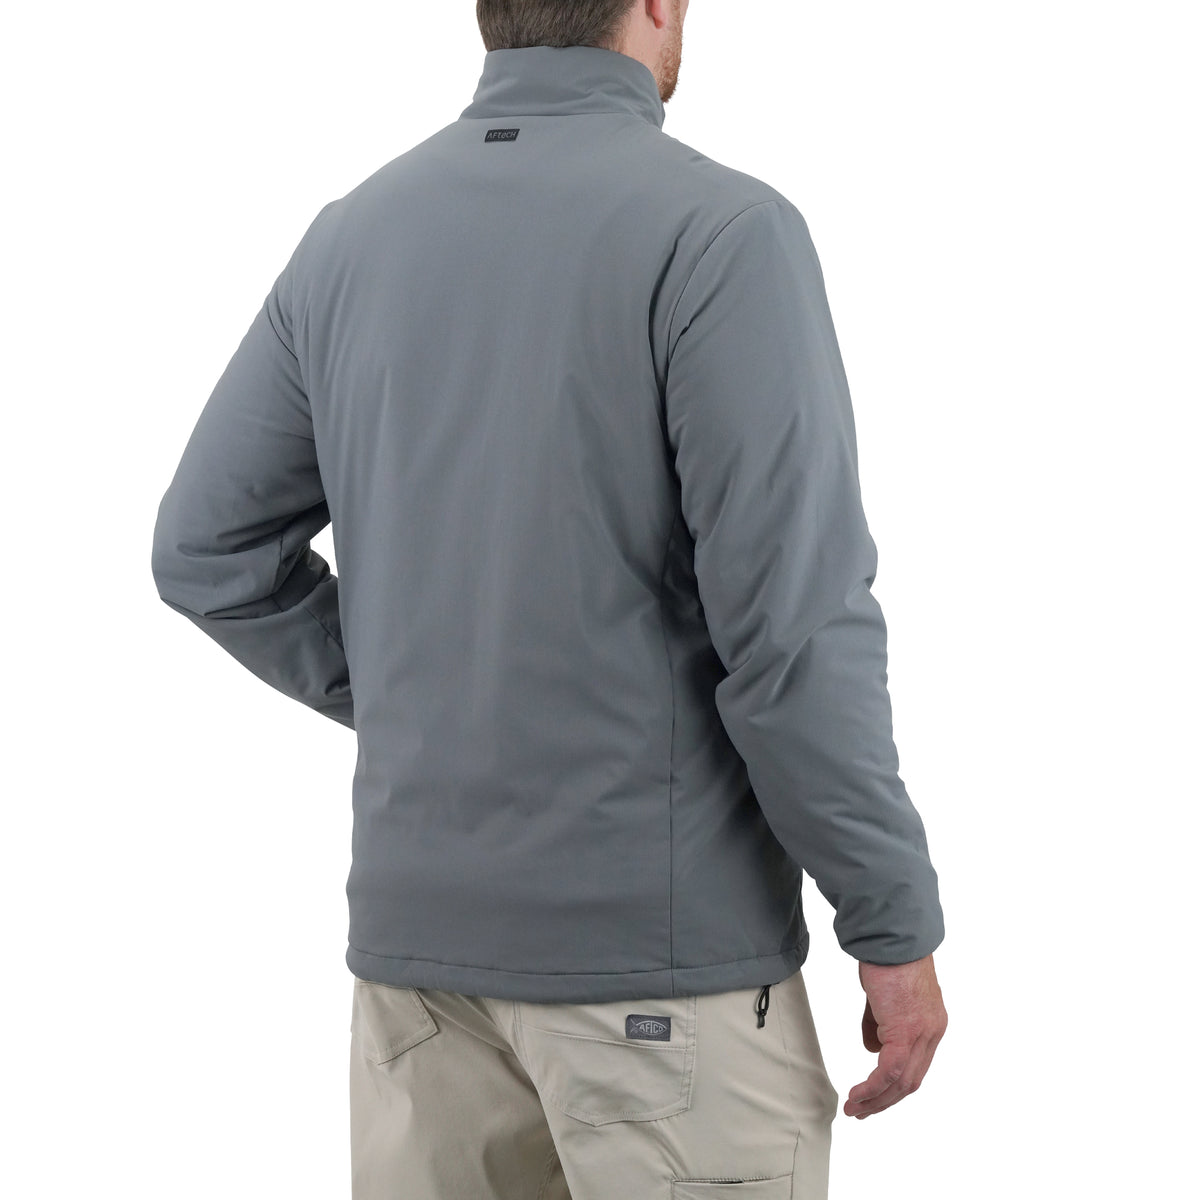 AFTCO Forge Insulated Jacket